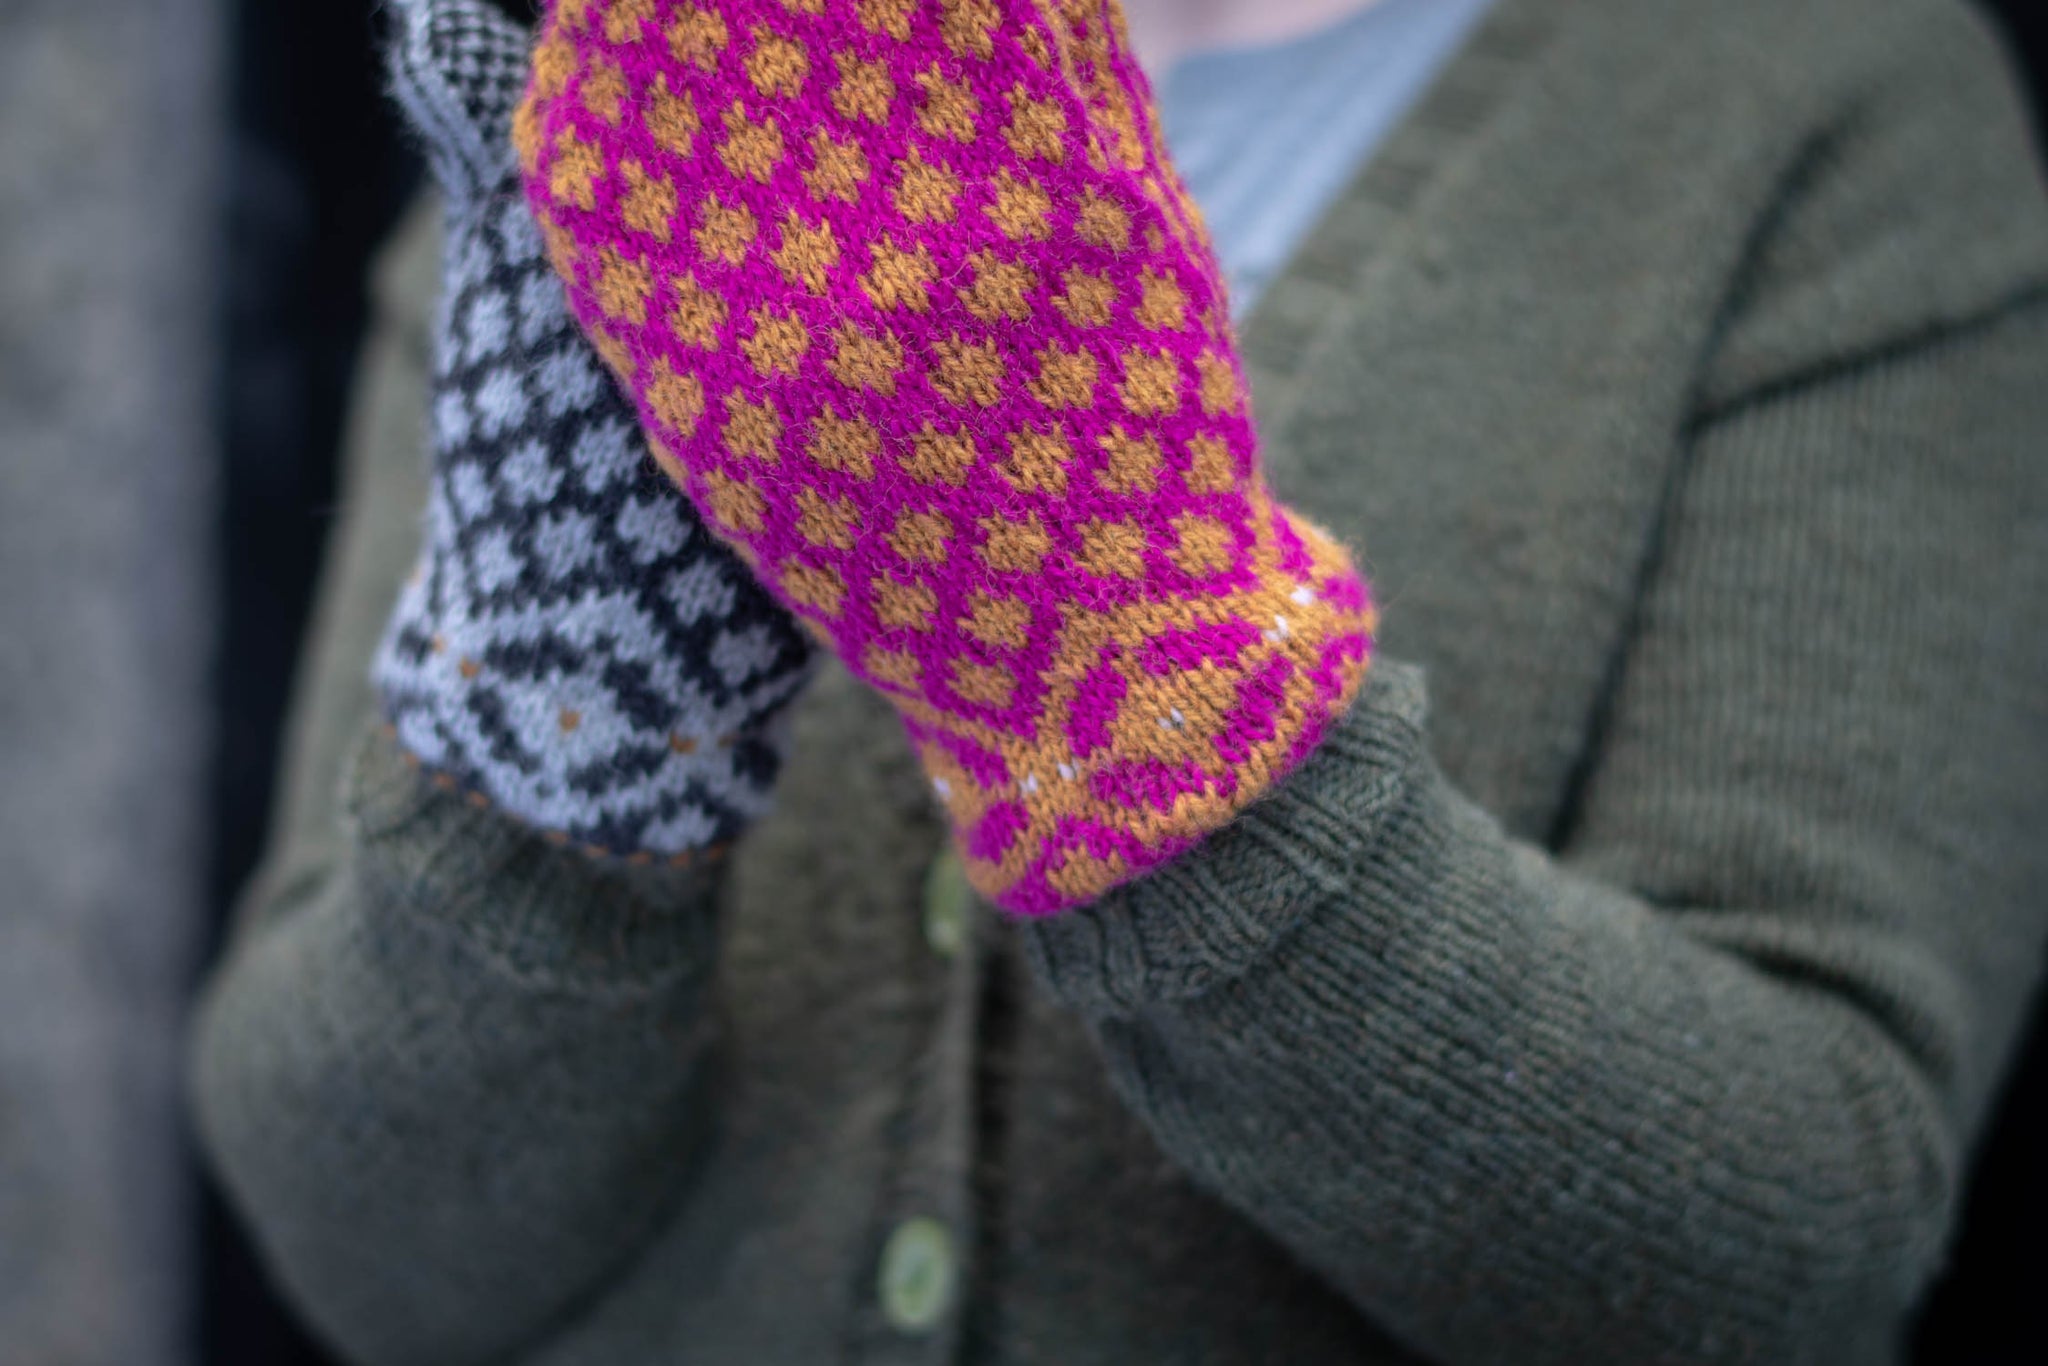 Two hands held up, clasped together. One is wearing a pink and yellow colourwork mitten, the other wears a grey mitten.